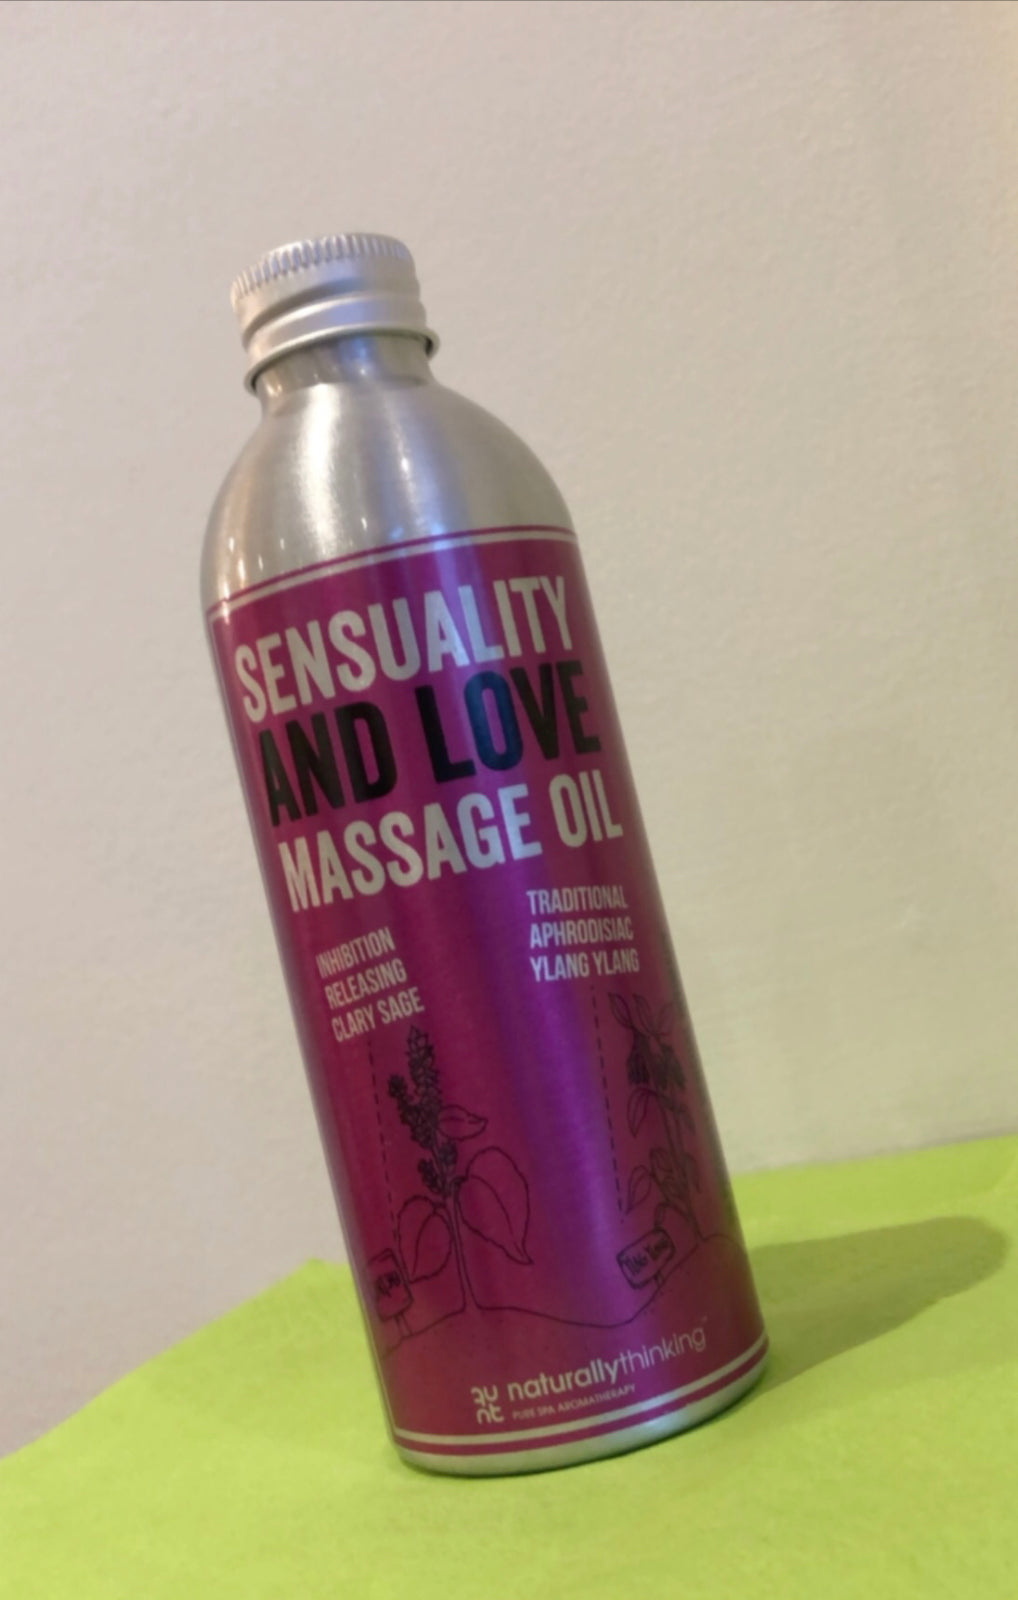 Sensuality and Love Massage Oil   200mls